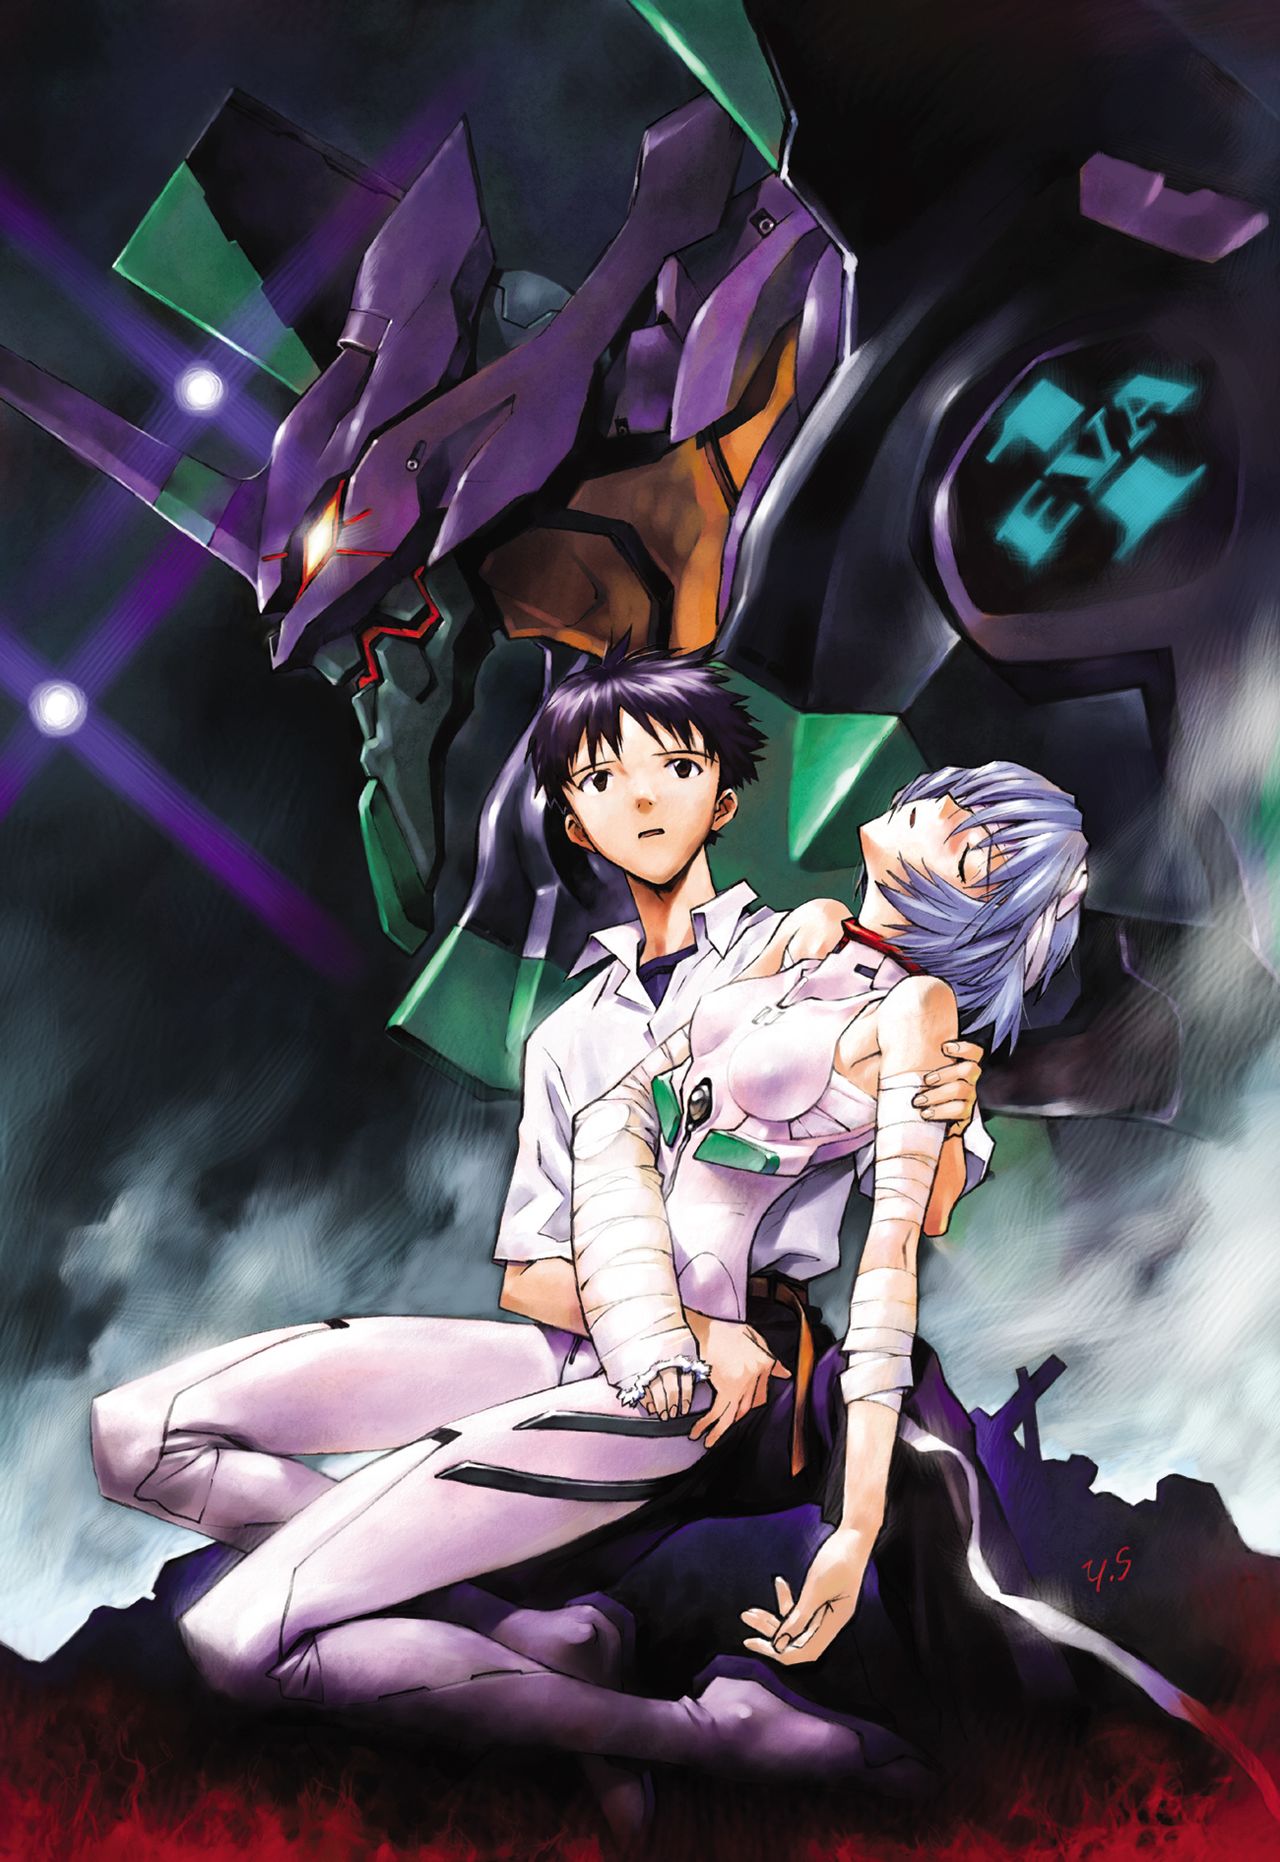 Classic Anime “Neon Genesis Evangelion” to Thrill and Perplex New Audiences  on Netflix 